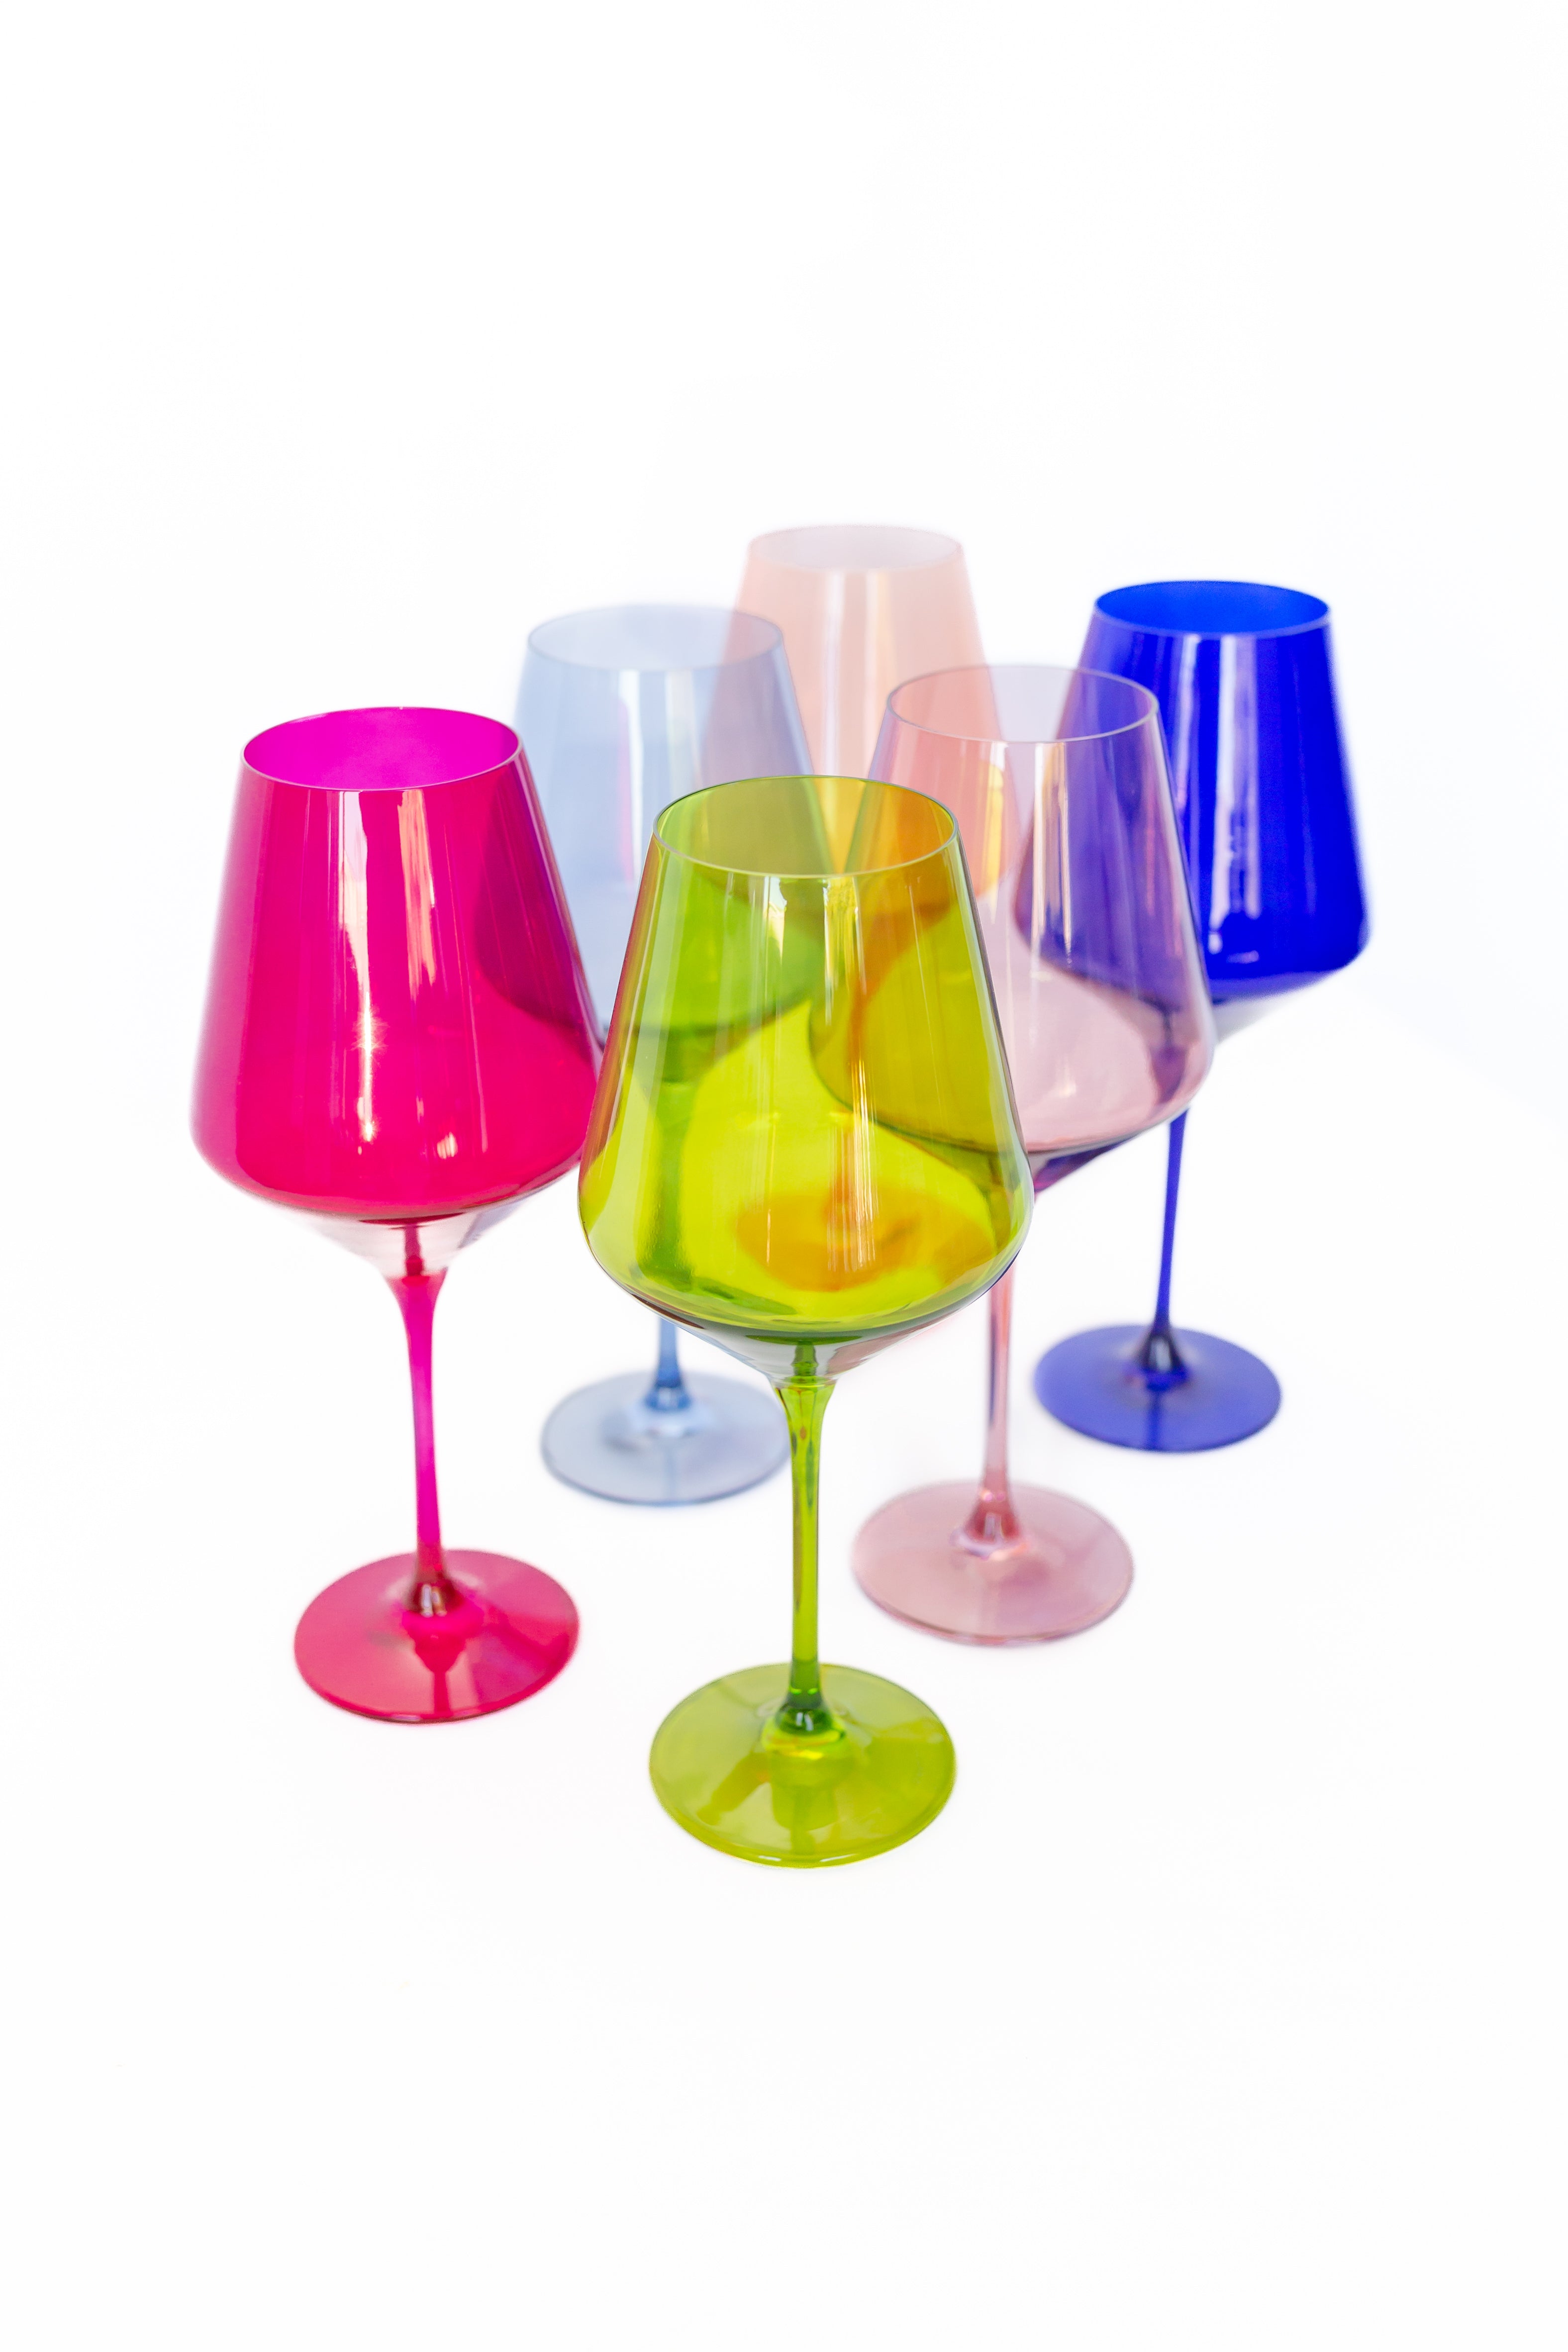 six differently shaped wine glasses